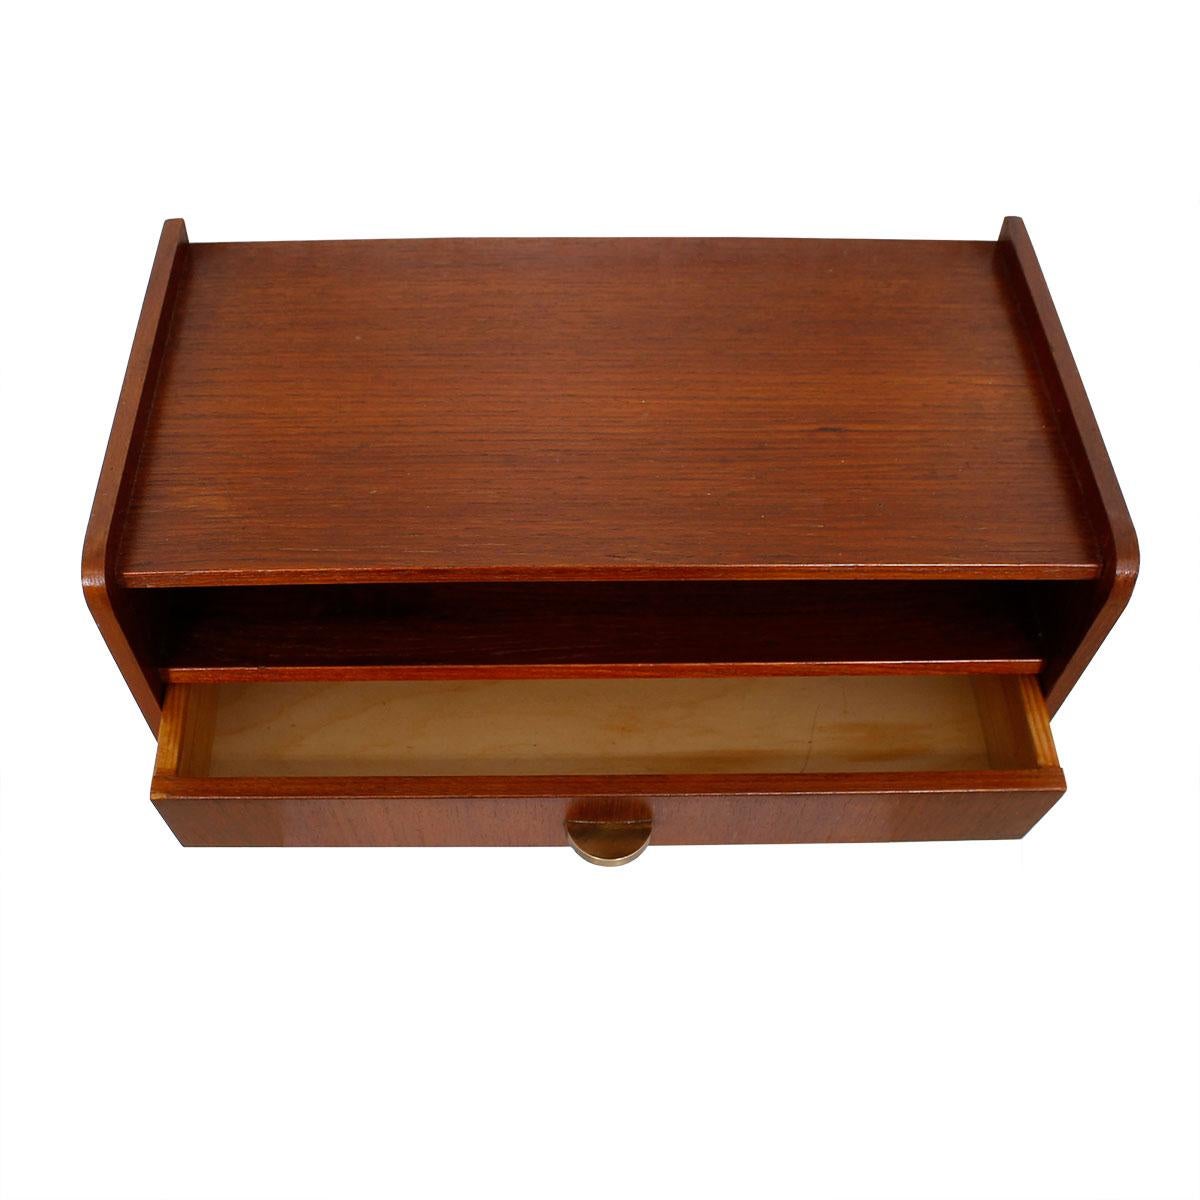 Beautiful Teak Wall Mounted Shelf with Cubby Storage and Drawer — Minimalism at Its Best. Drawer has a lovely half-moon brass pull. Use it as a nightstand for an uncluttered look. Perfect in an entryway with a mirror mounted above.